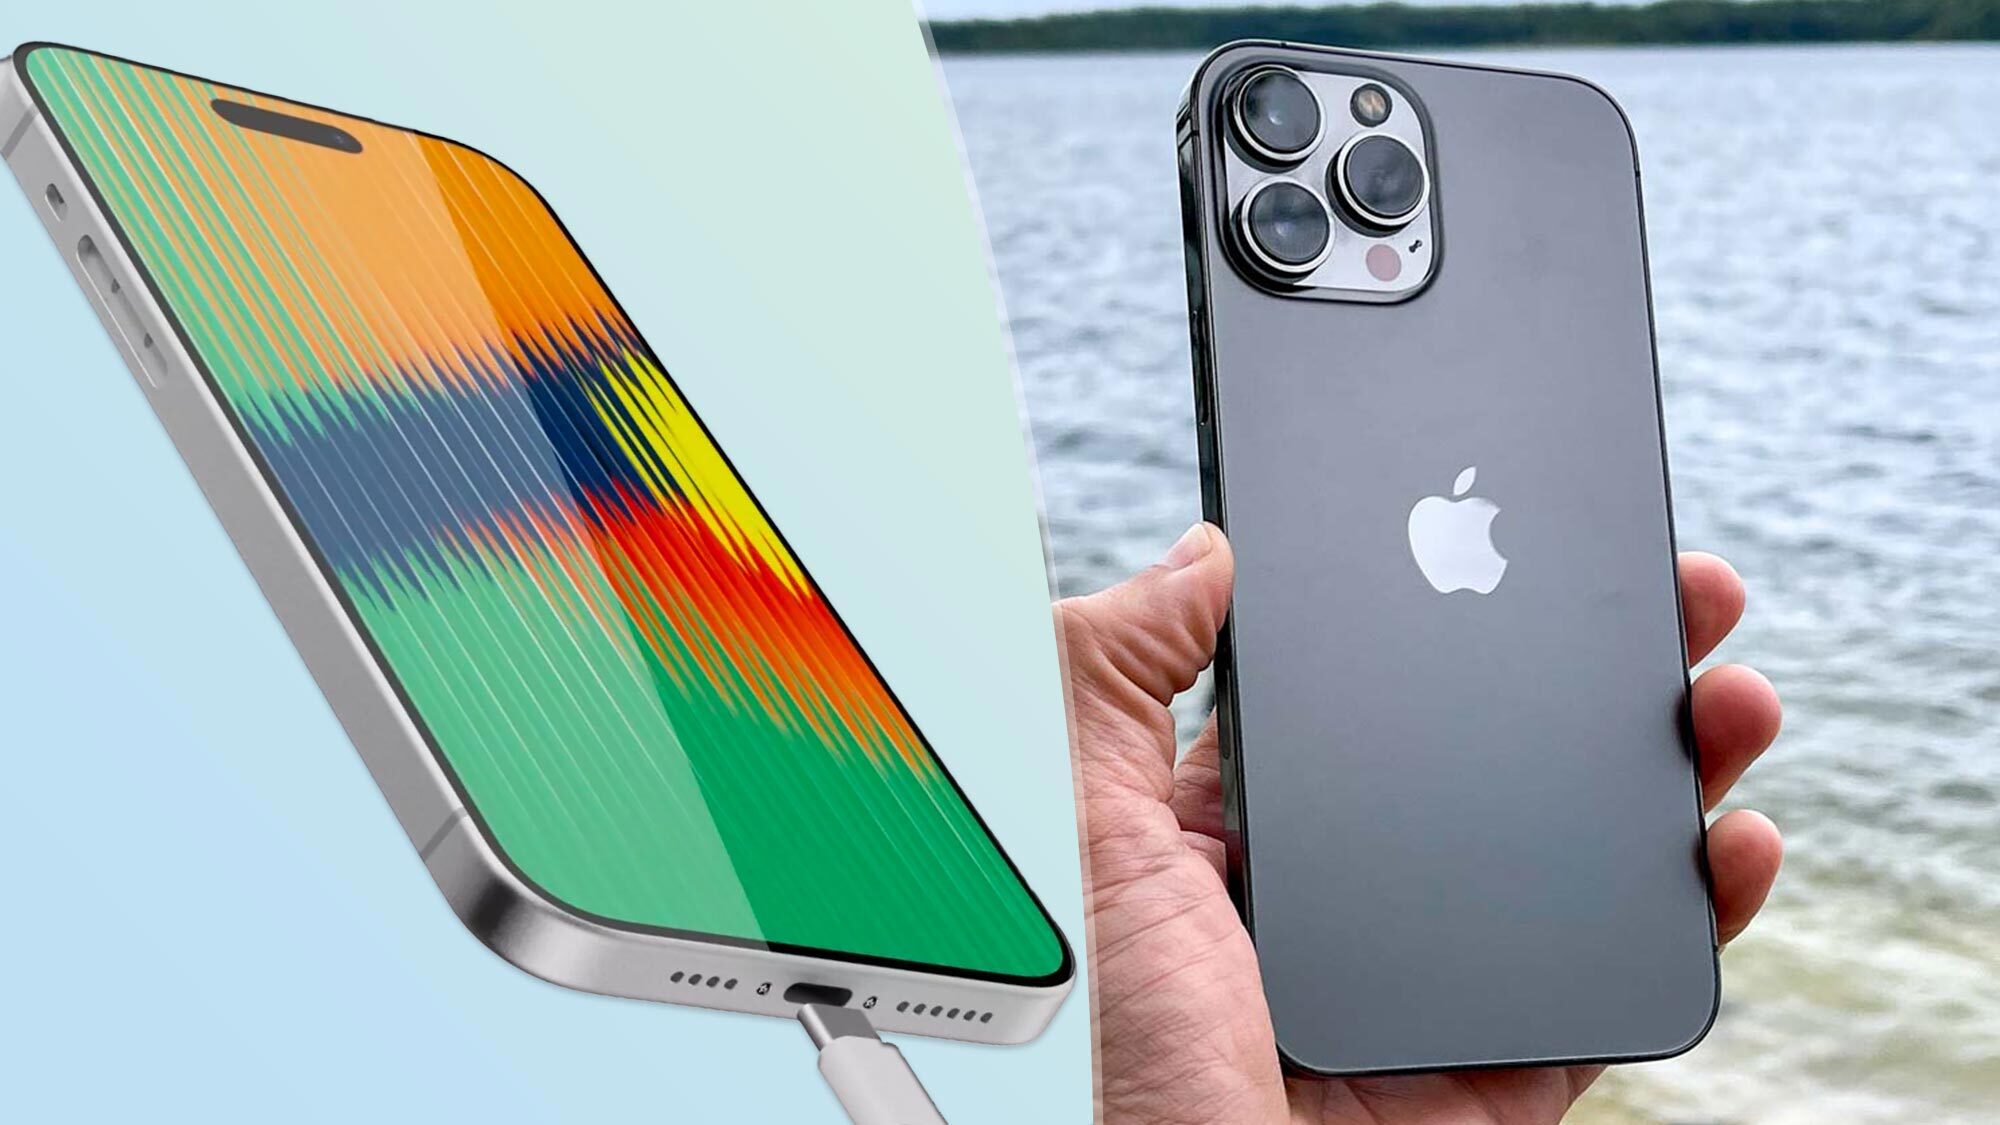 Apple iPhone 13 series tipped to get camera upgrades: All you need to know